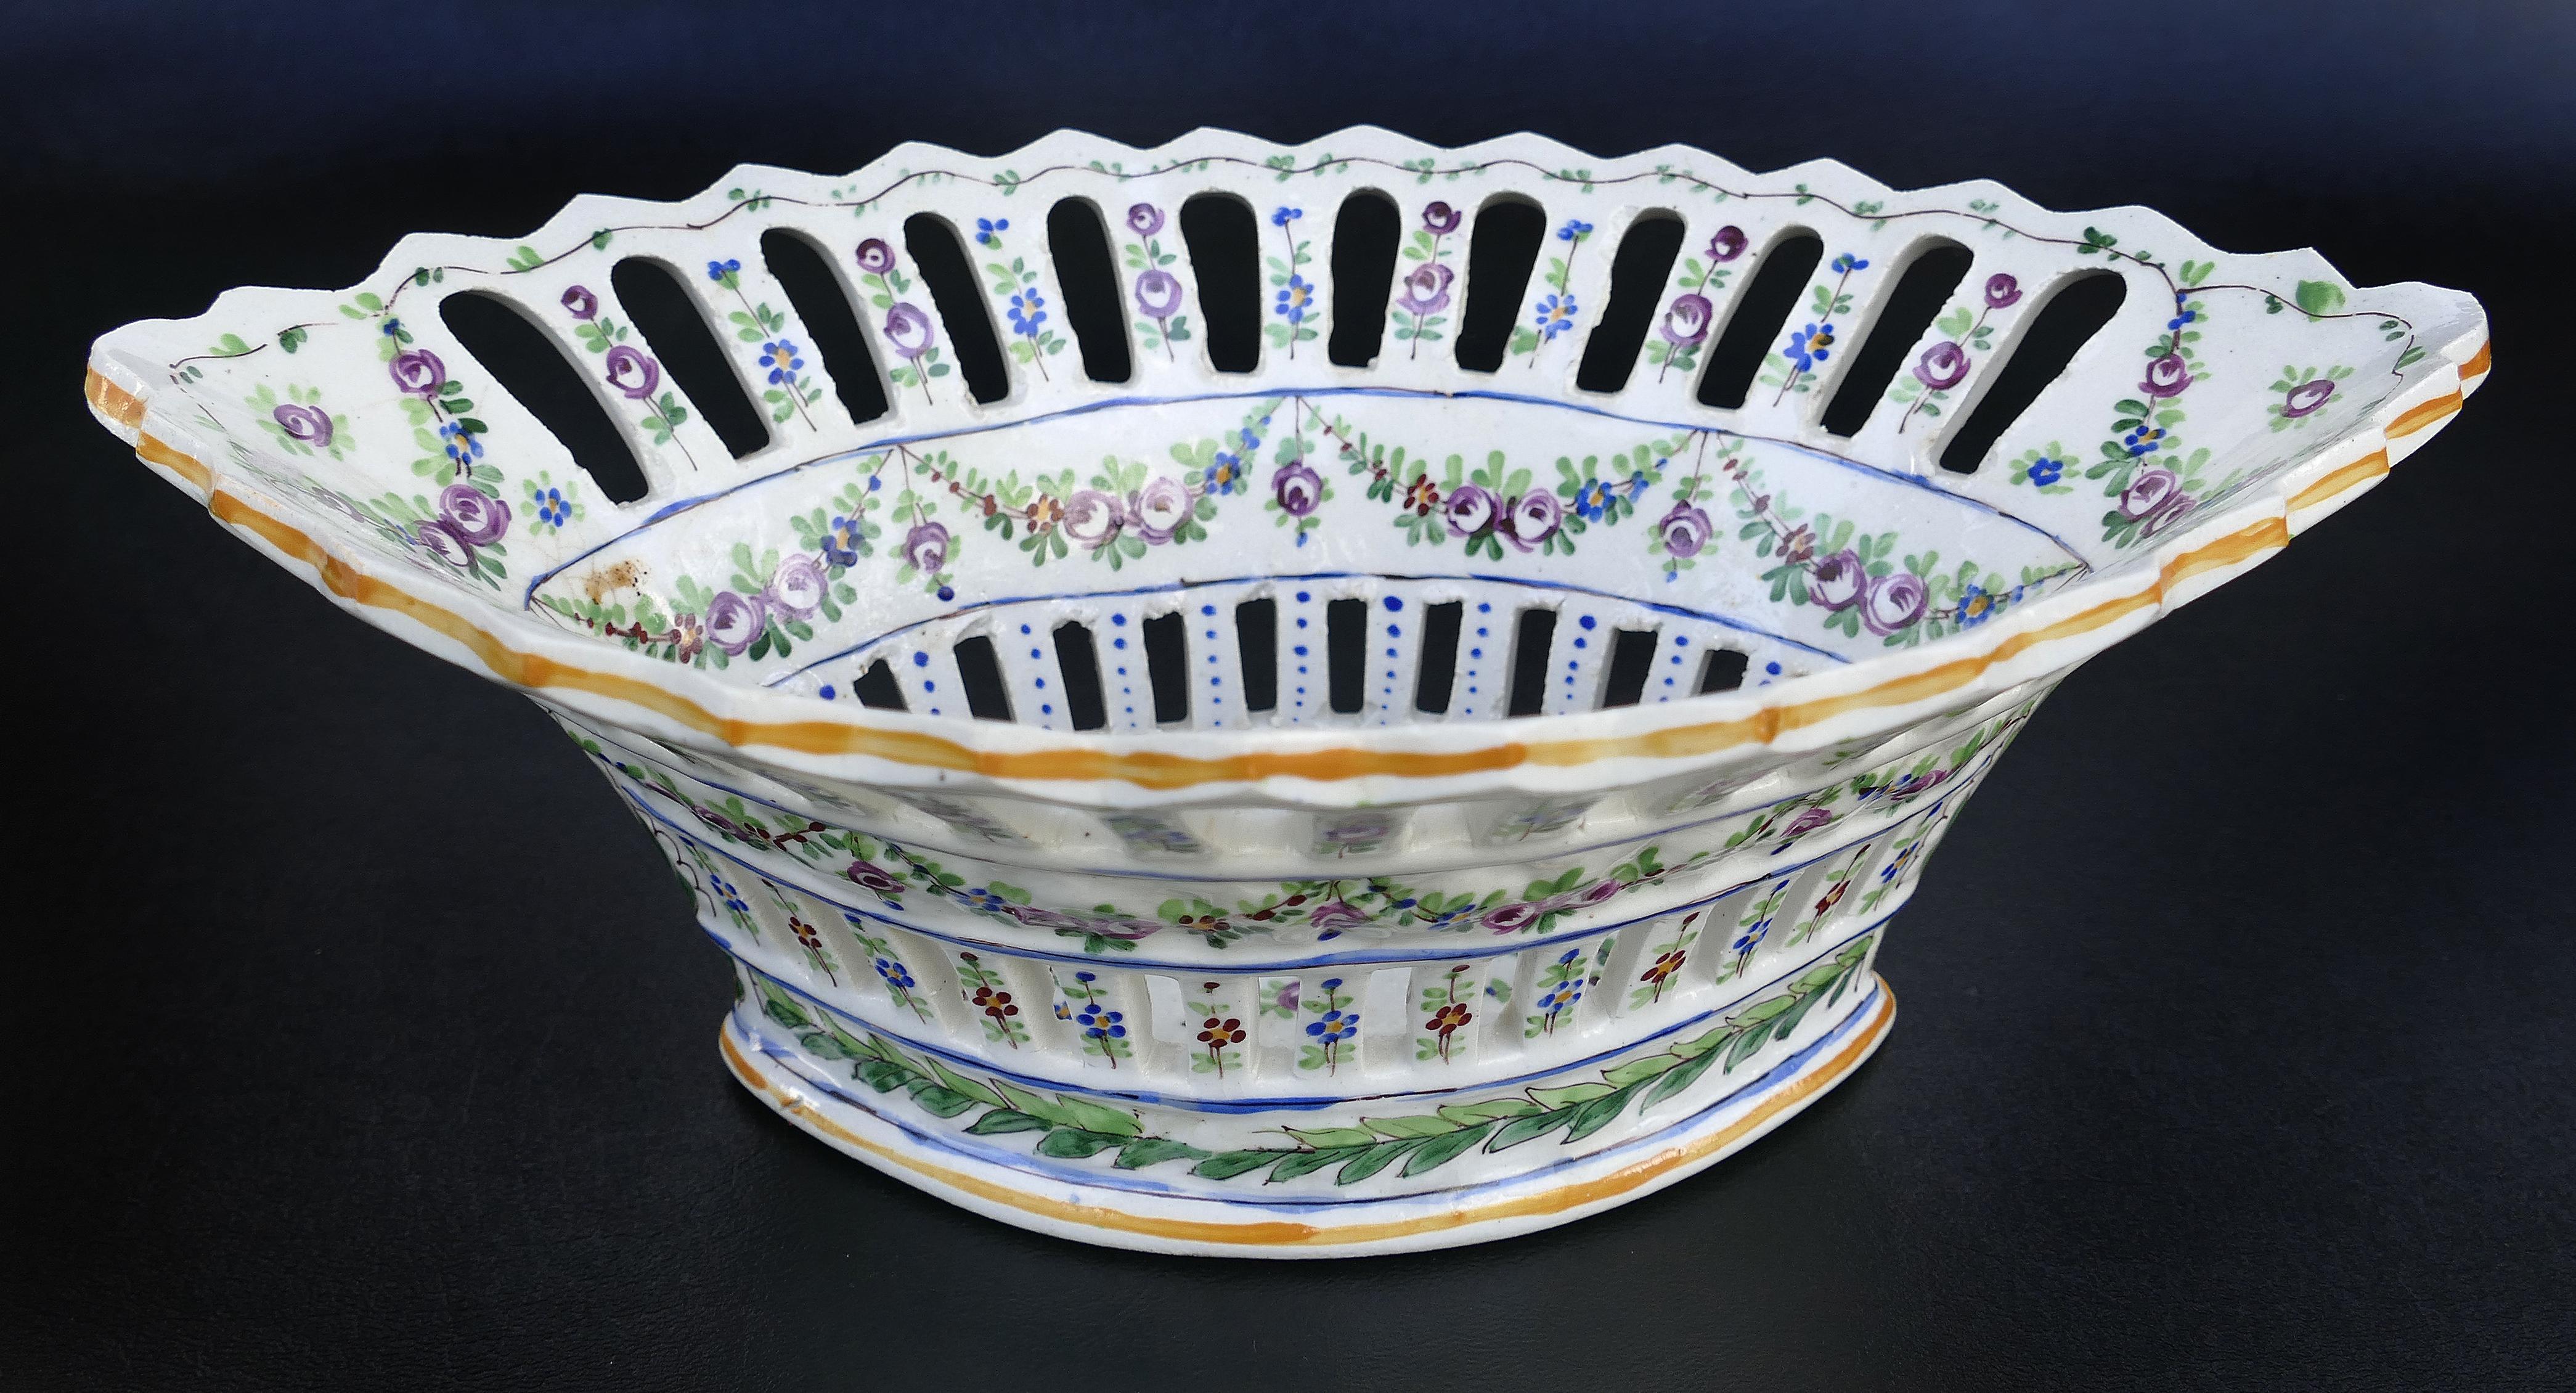 Sevres reticulated hand painted porcelain basket with scalloped edge

Offered for sale is a Sevres France hand painted porcelain reticulated bowl or basket with a scalloped edge and hand painted garlands swagged on the exterior. The piece is